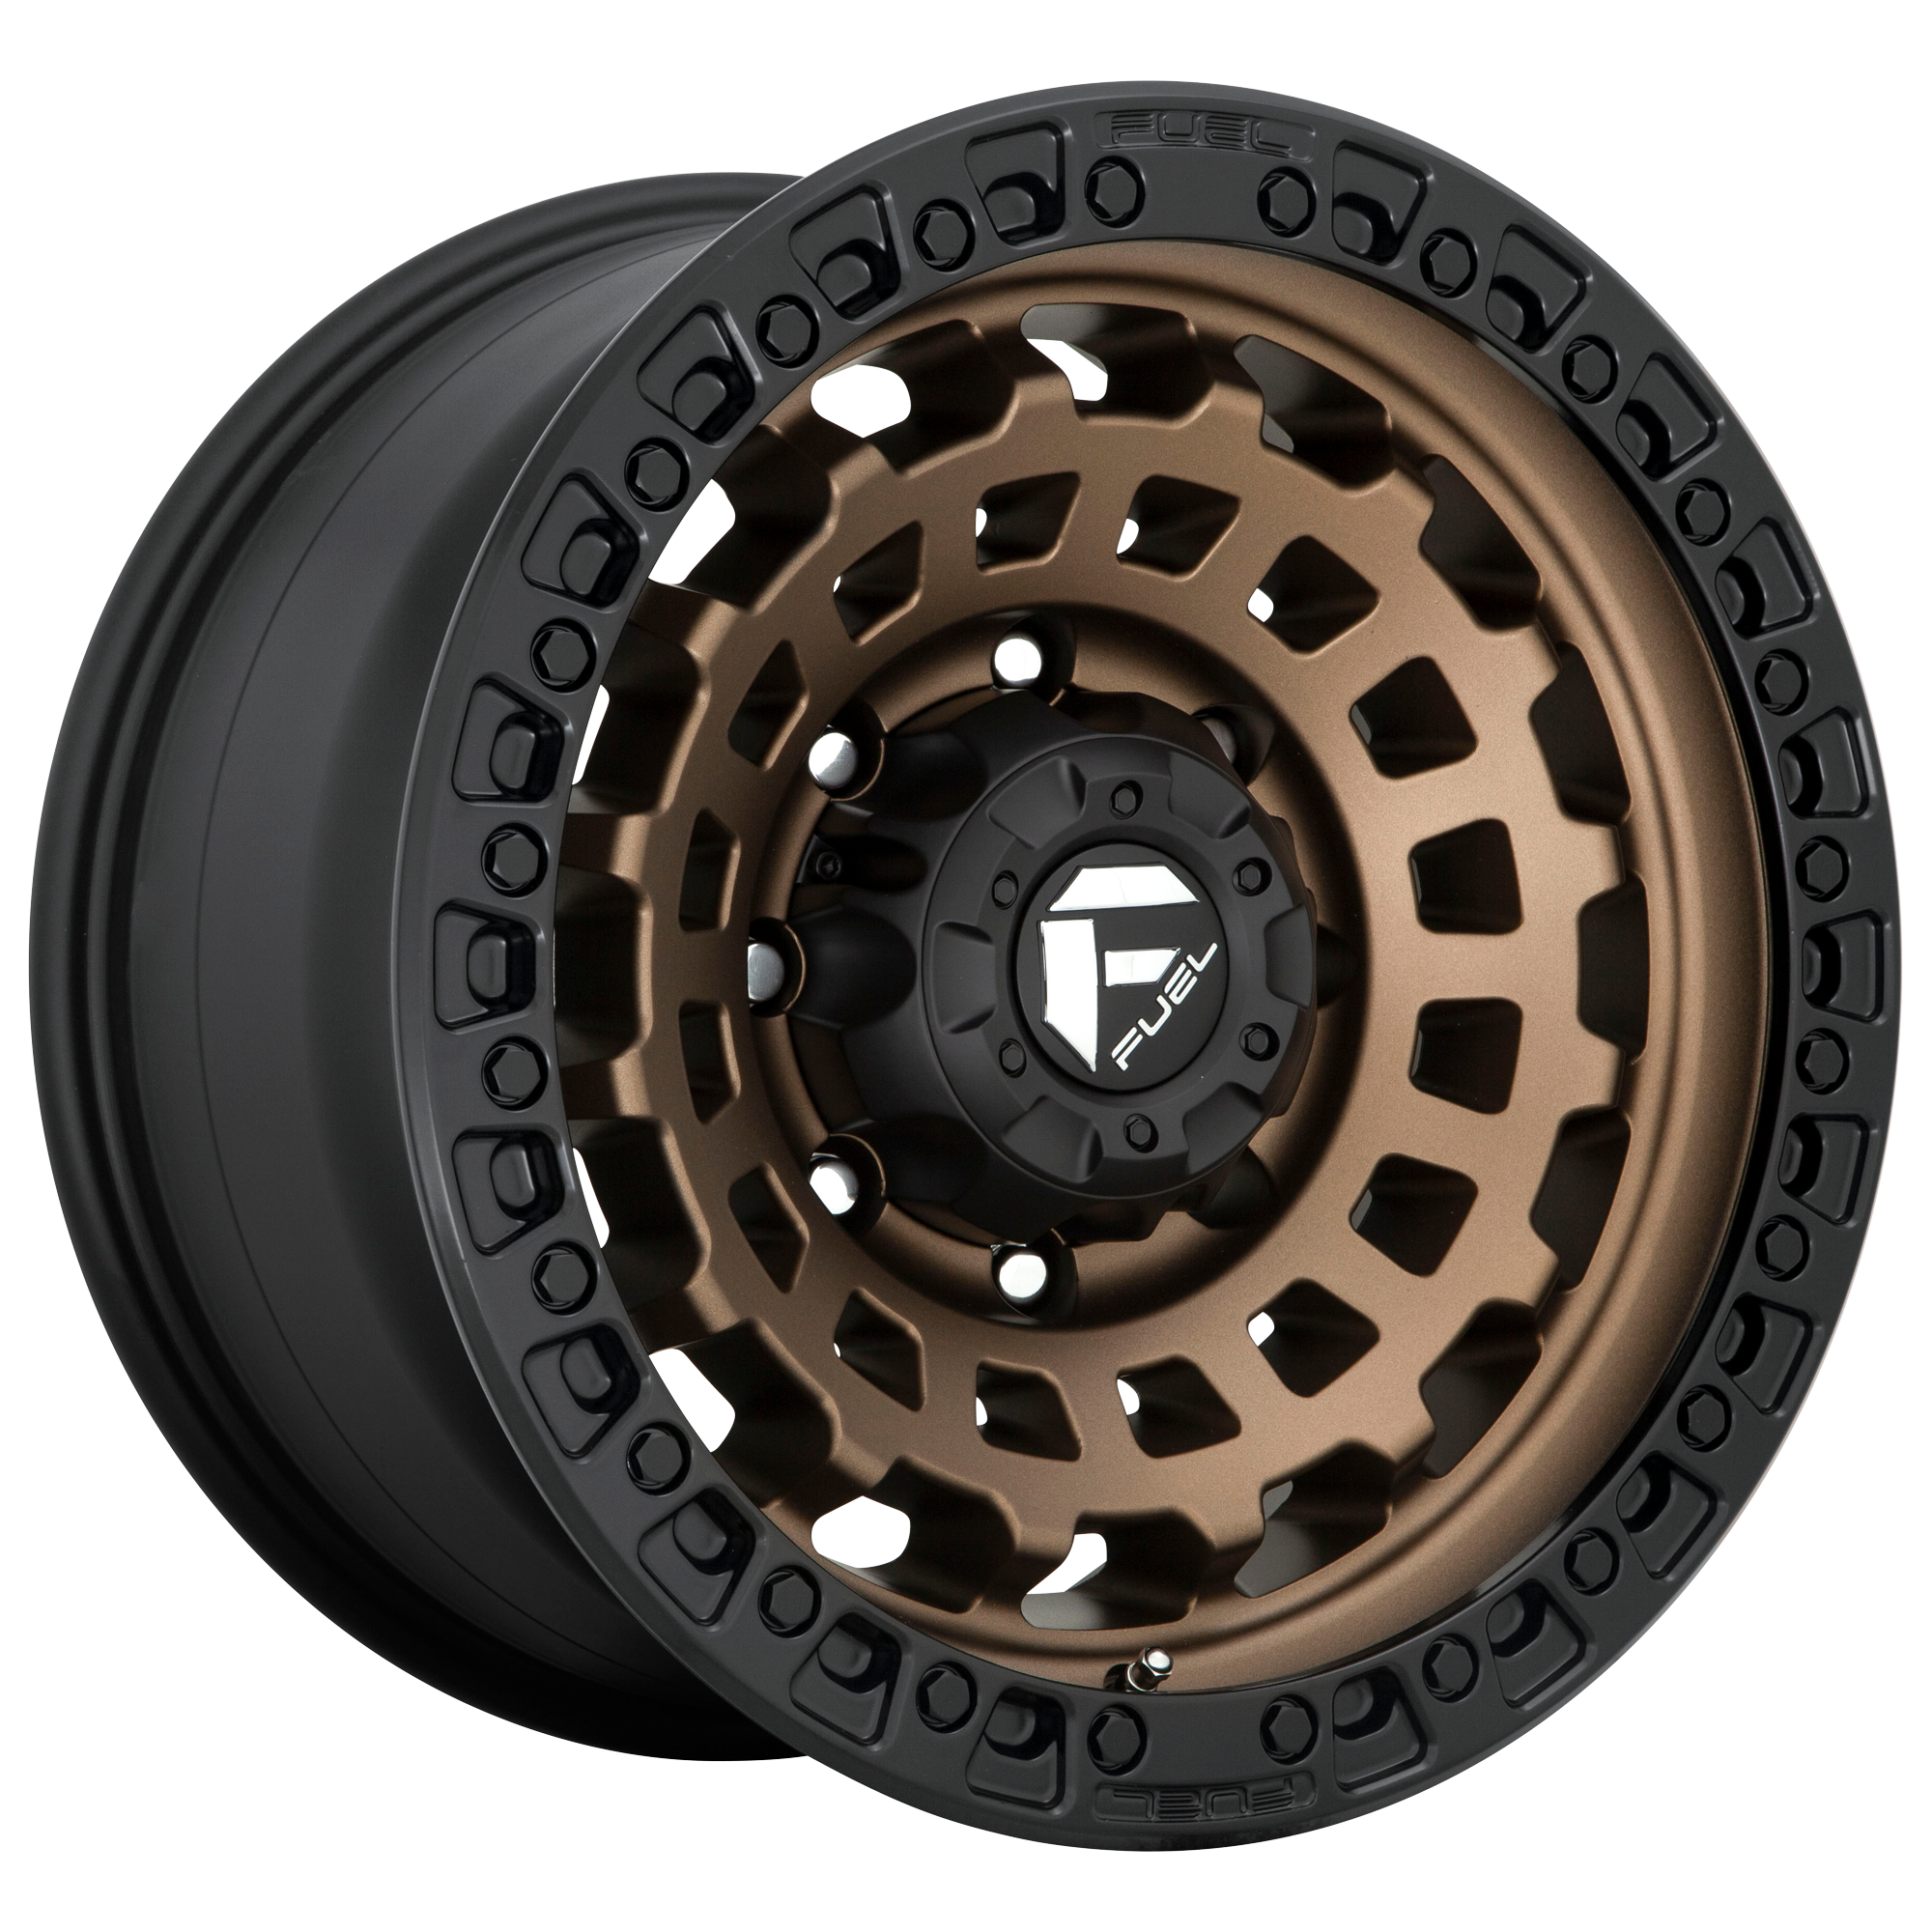 ZEPHYR 18x9 5x150.00 MATTE BRONZE BLACK BEAD RING (-12 mm) - Tires and Engine Performance